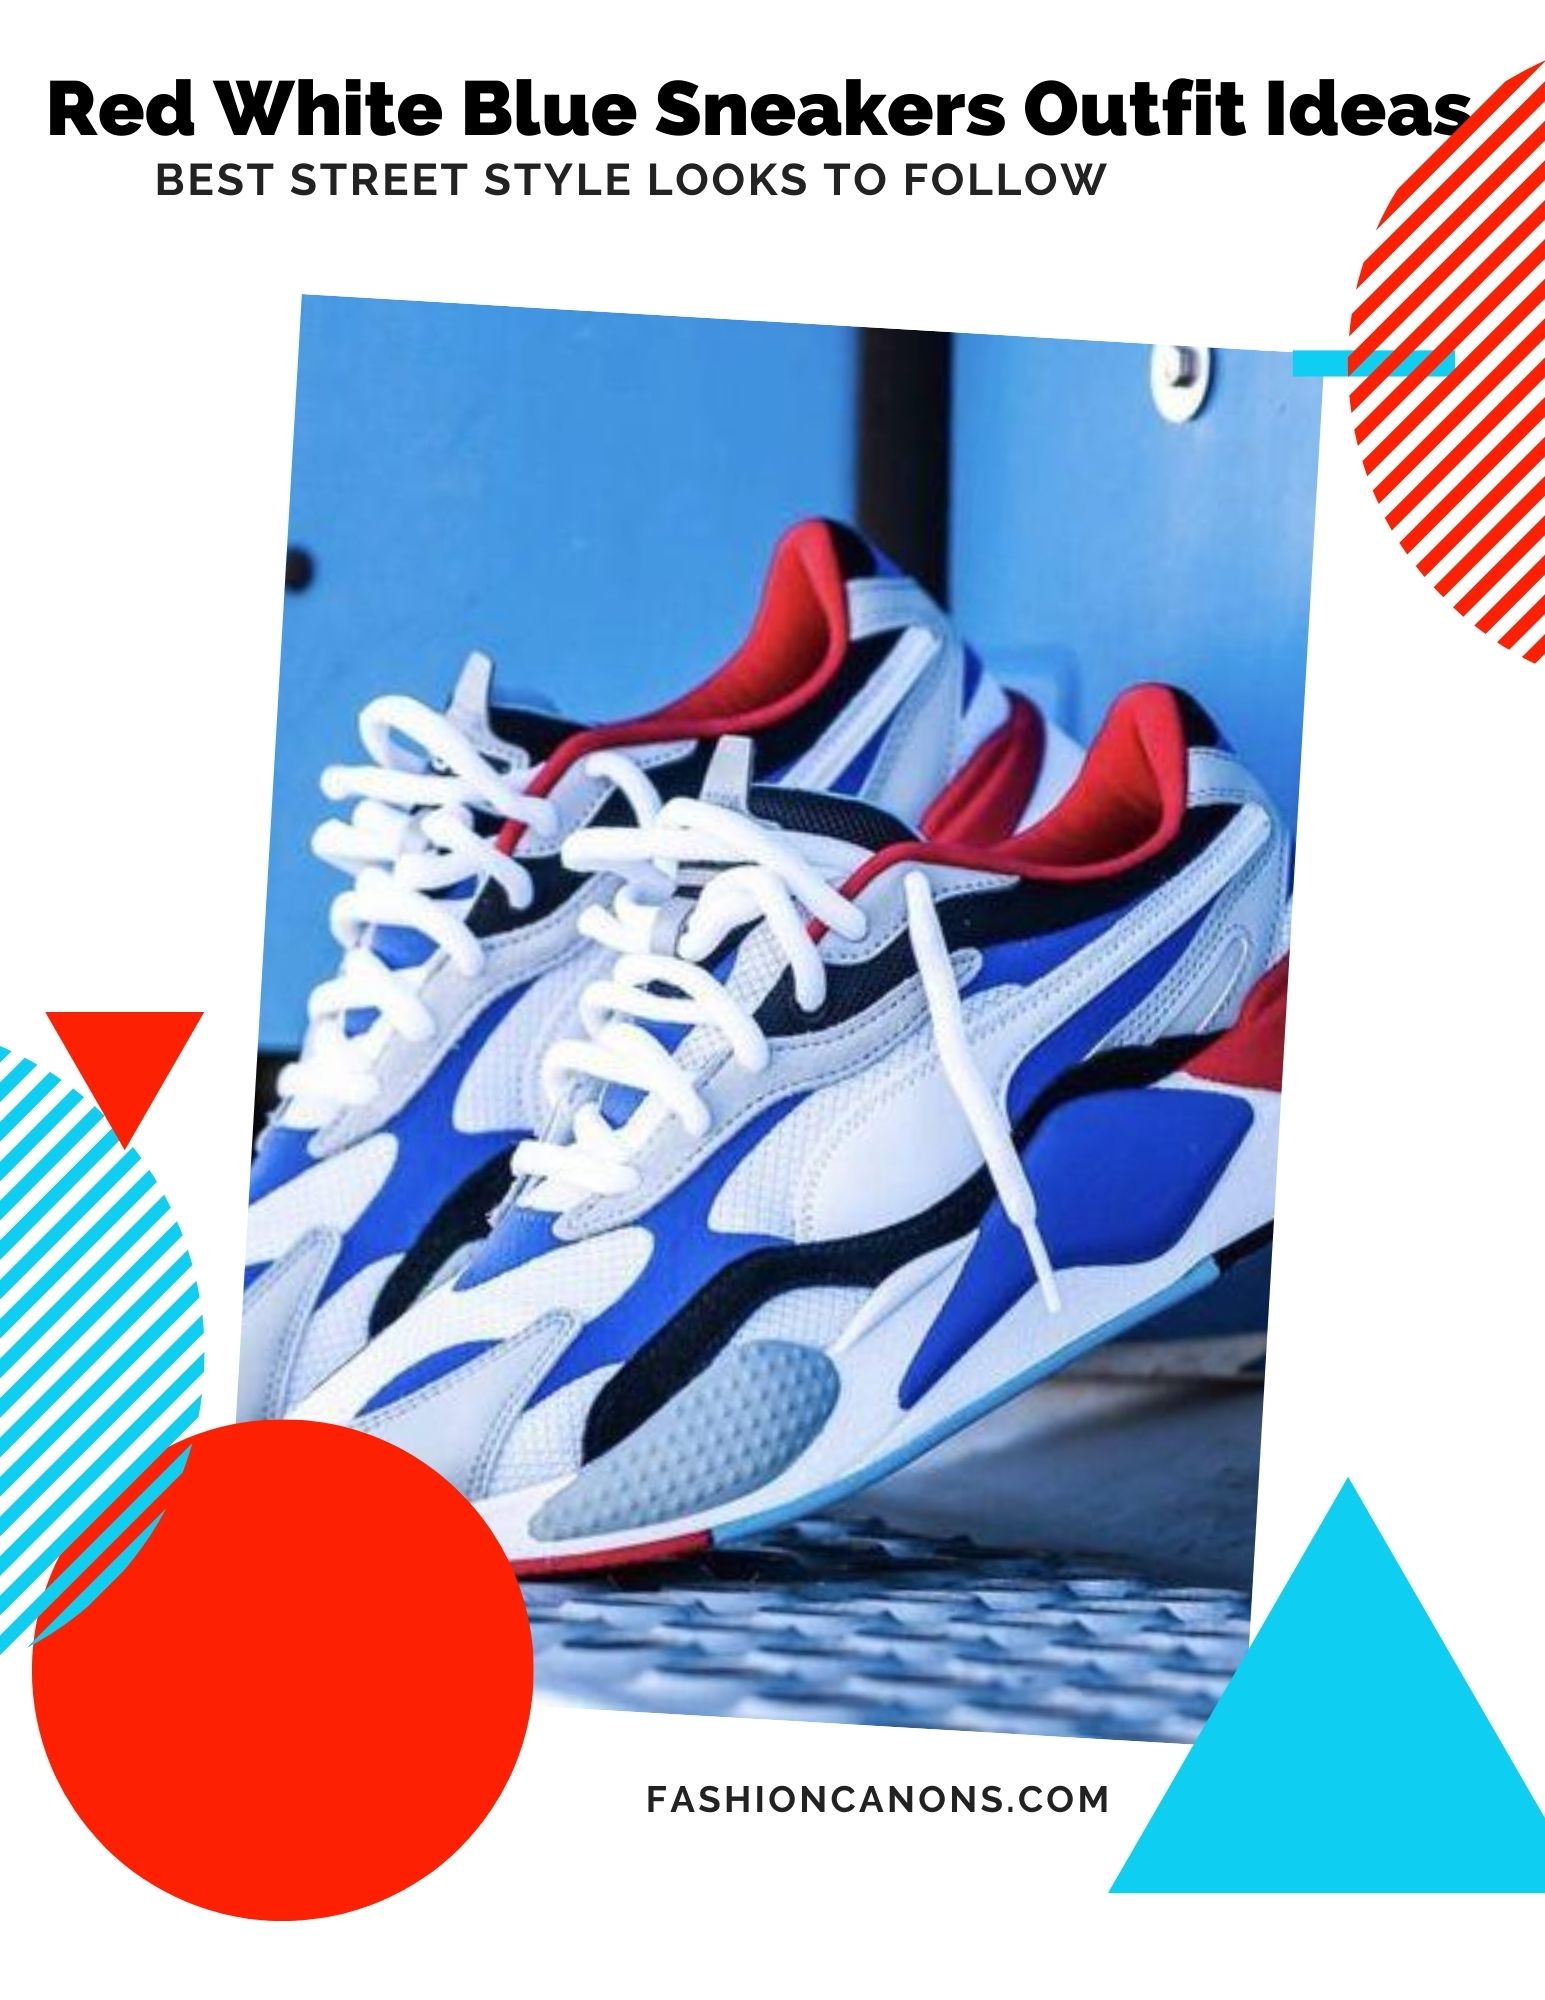 Red White Blue Sneakers For Women 2021 